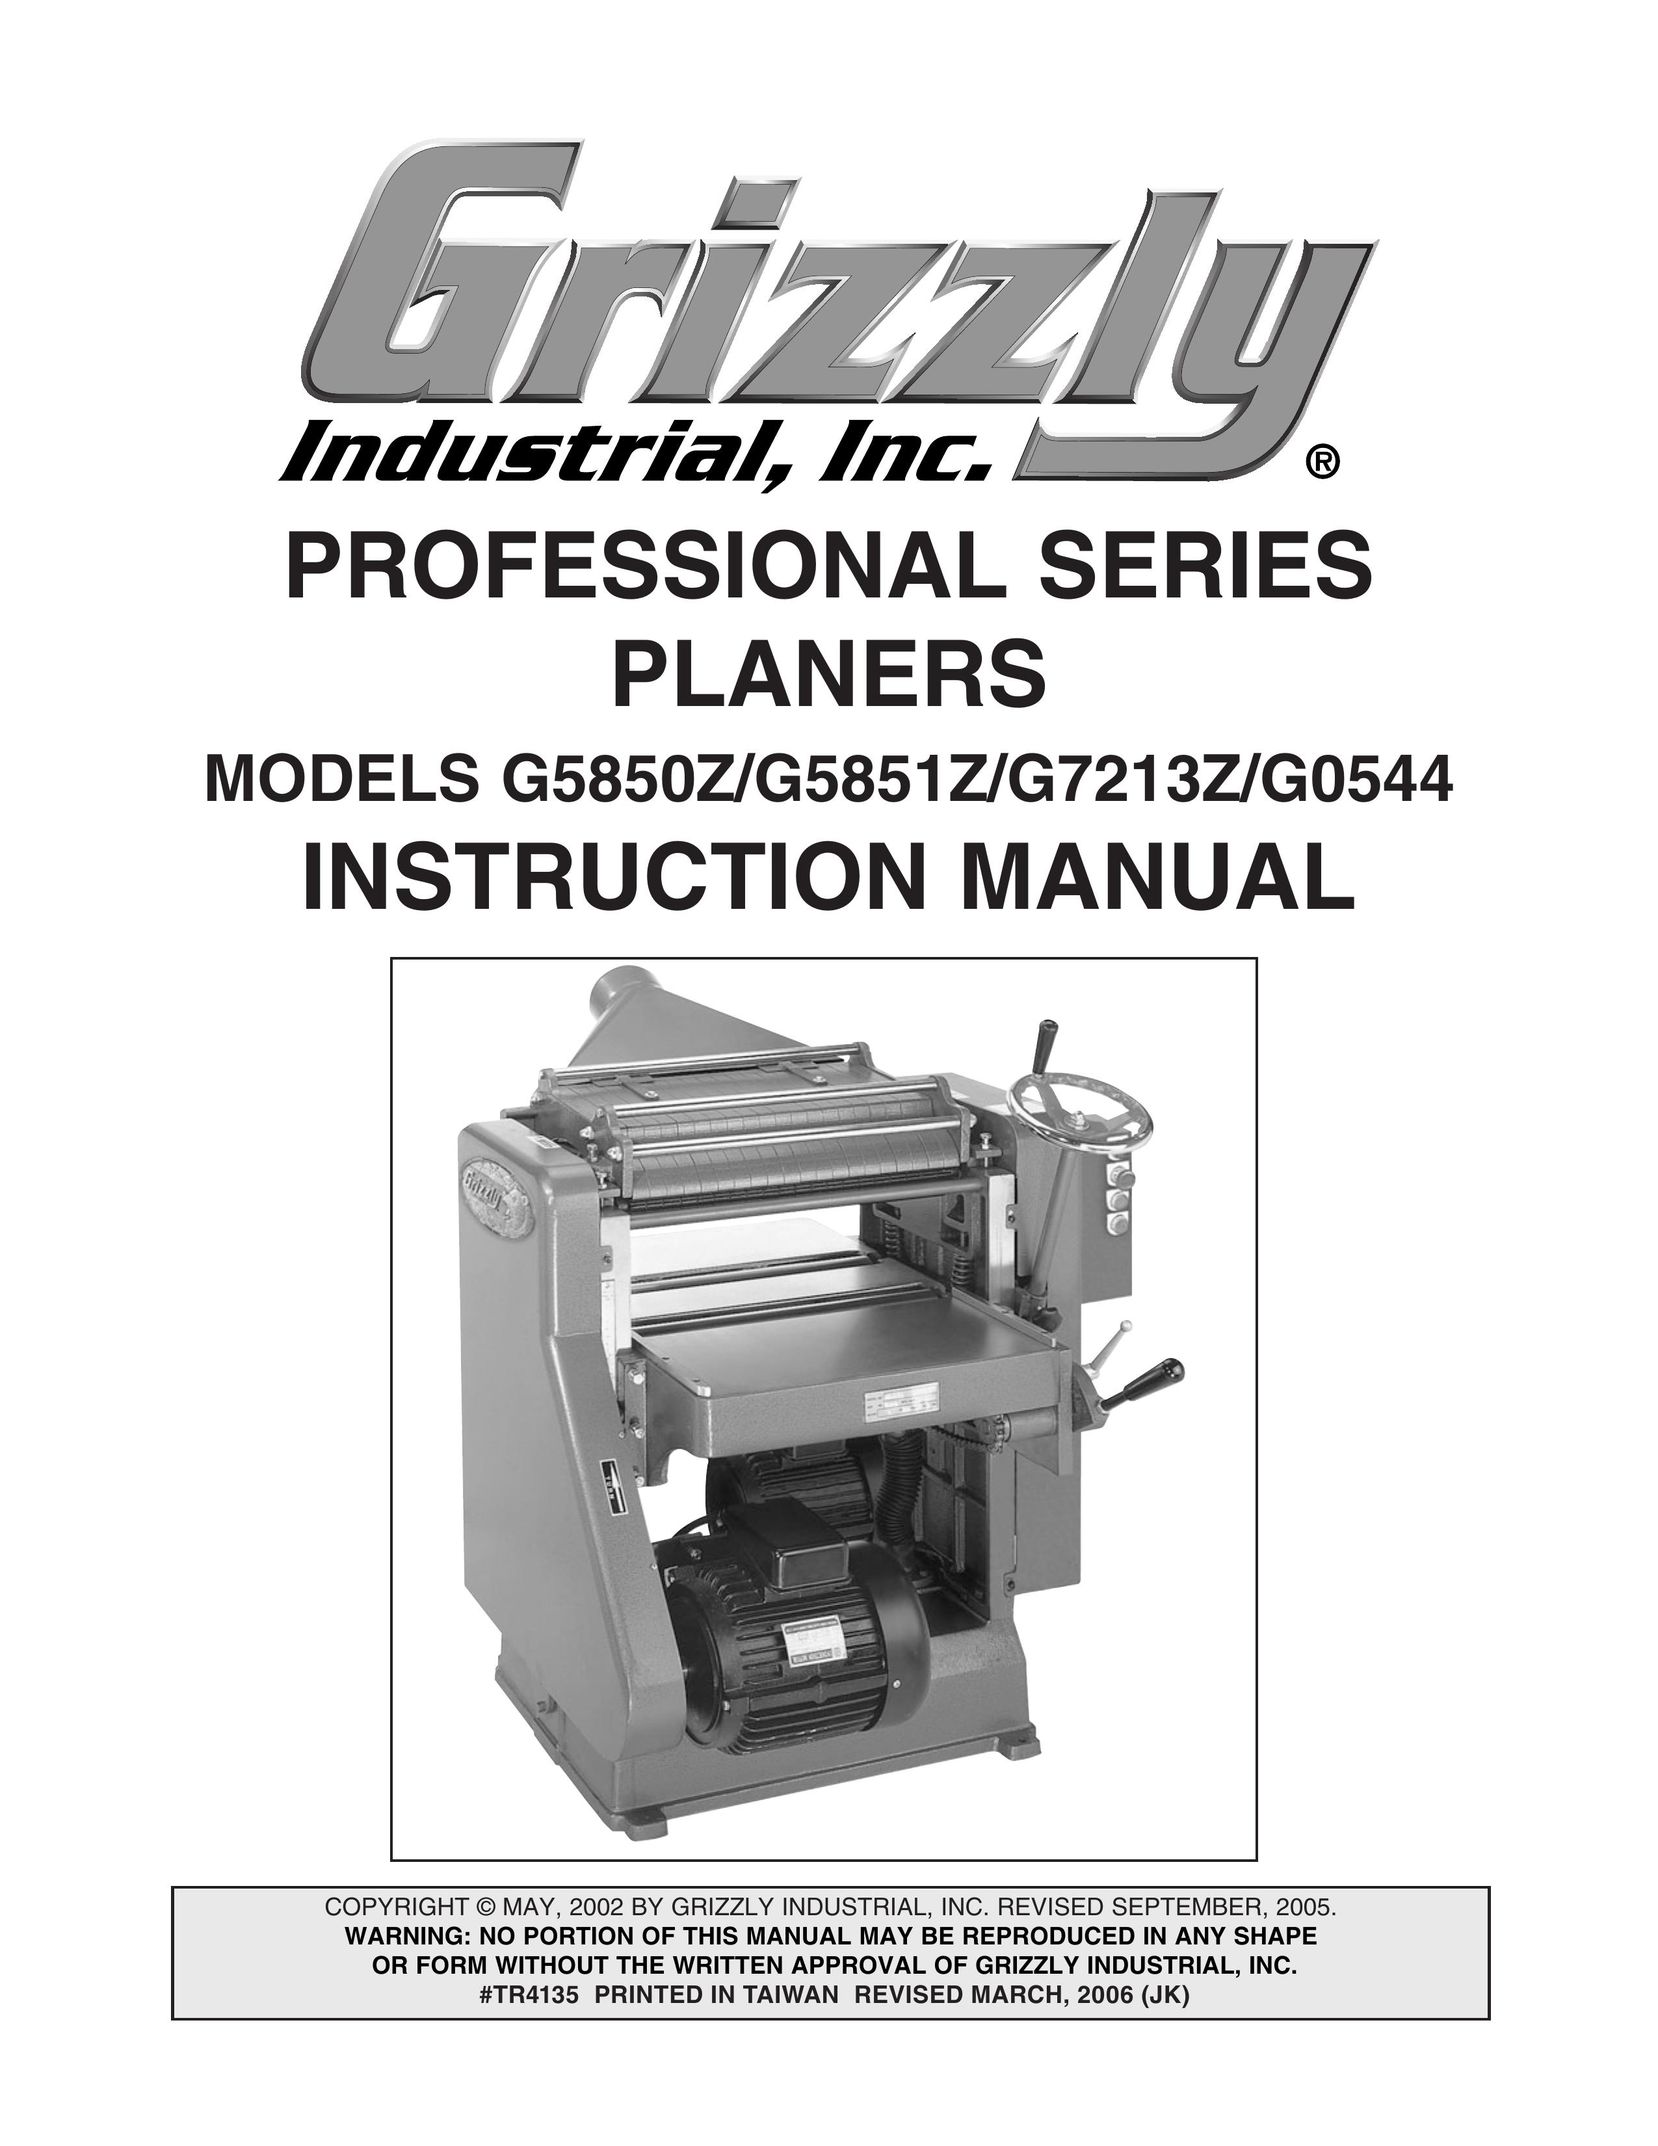 Grizzly G0544 Planer User Manual